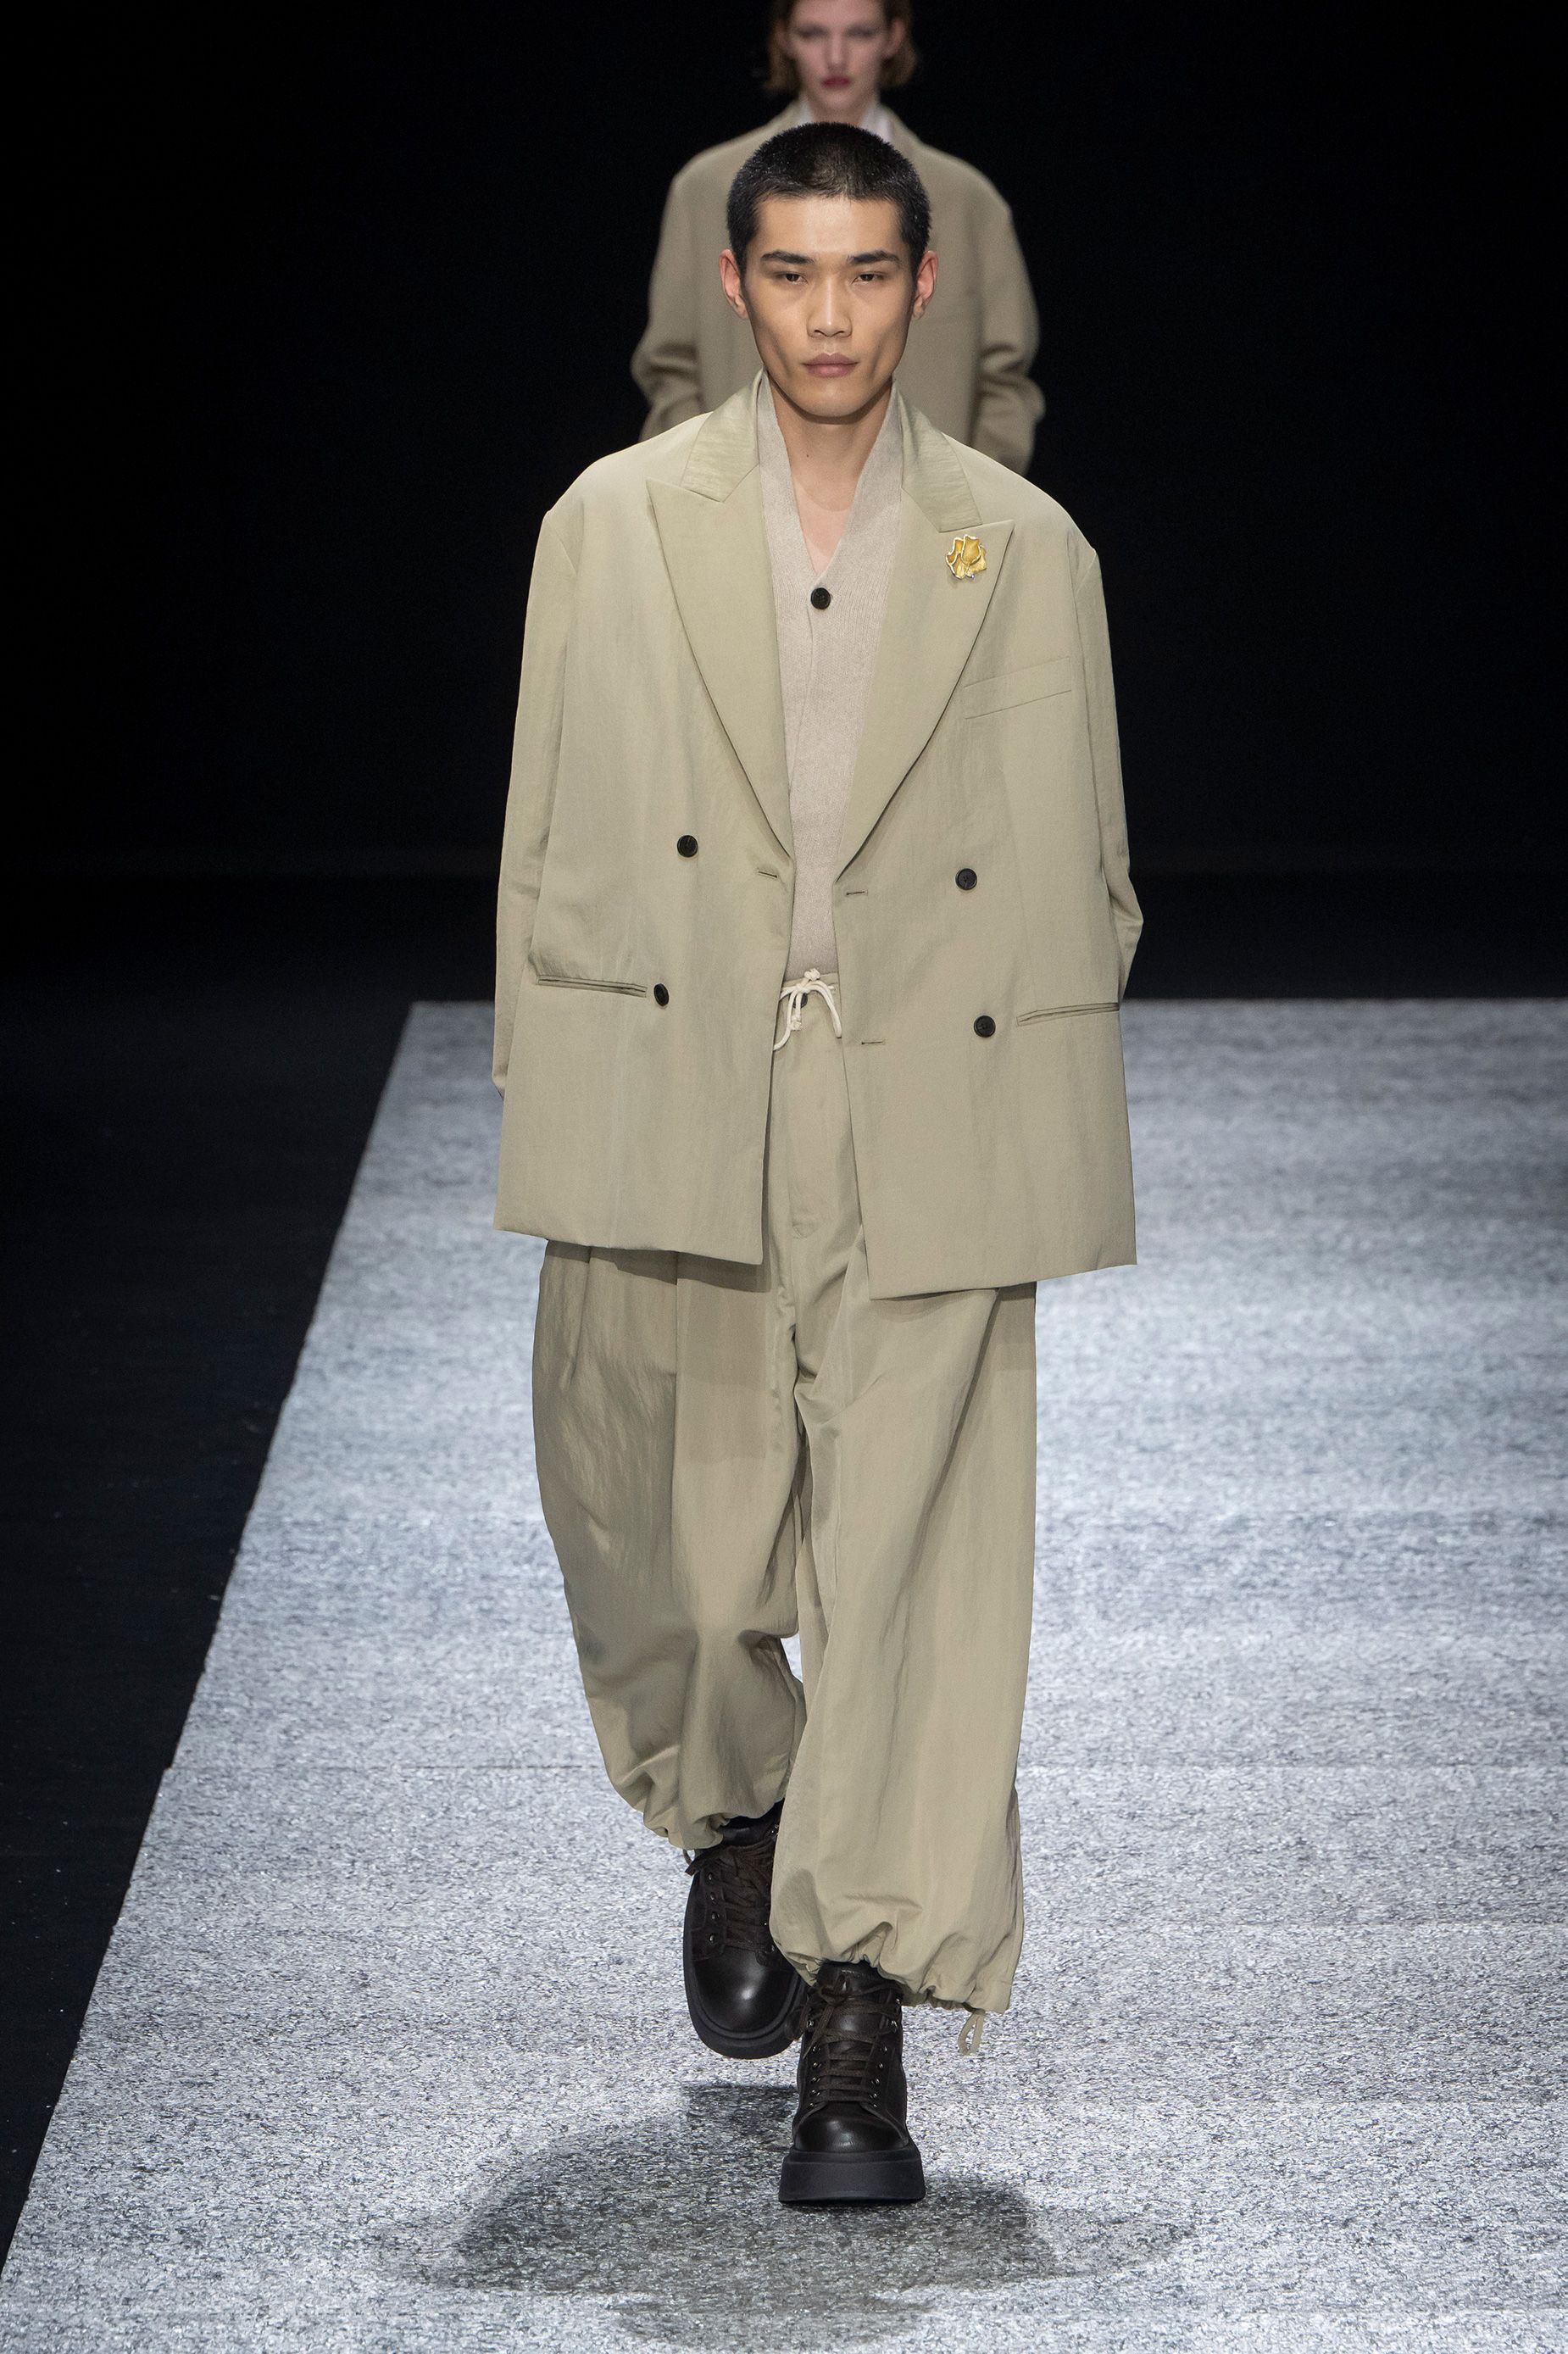 Functional, useful and classic, as above at Emporio Armani, were the key themes of the season in Milan.